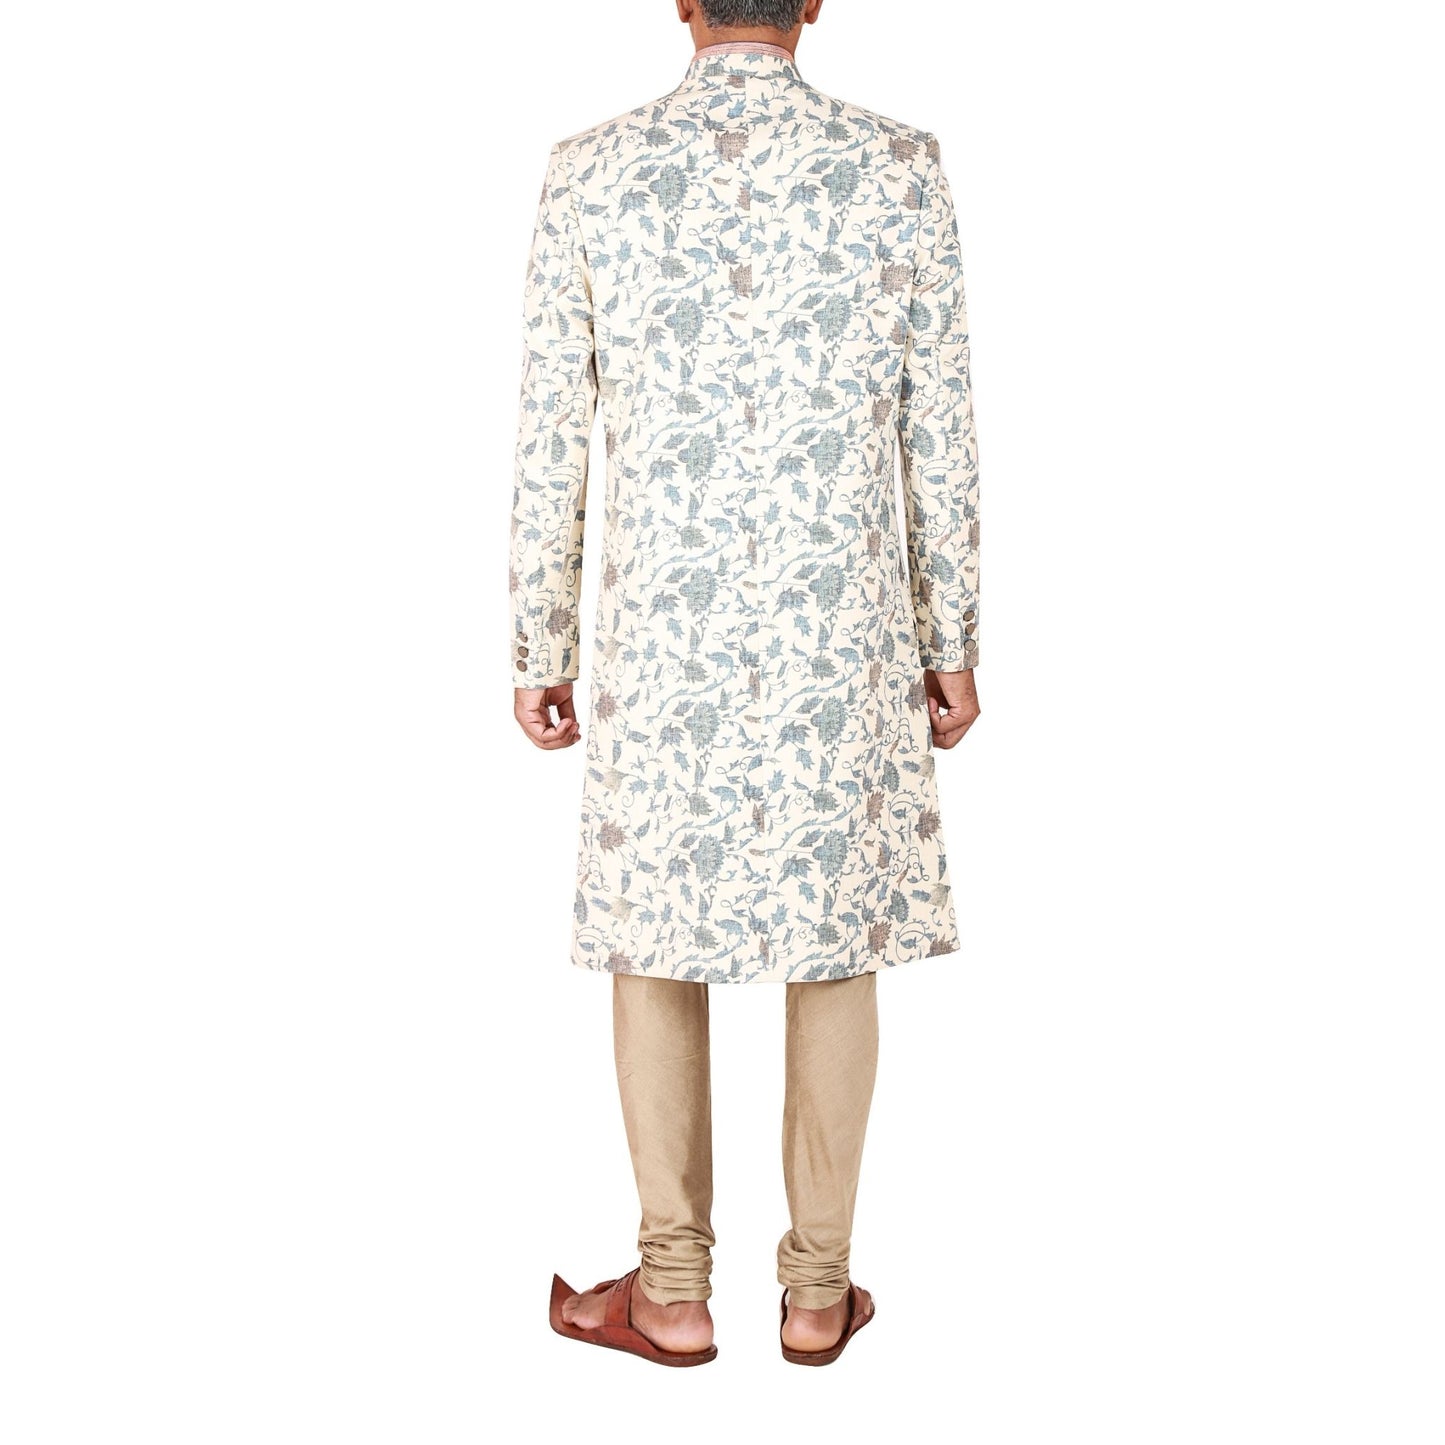 Fitted sherwani in floral printed linen blend suting